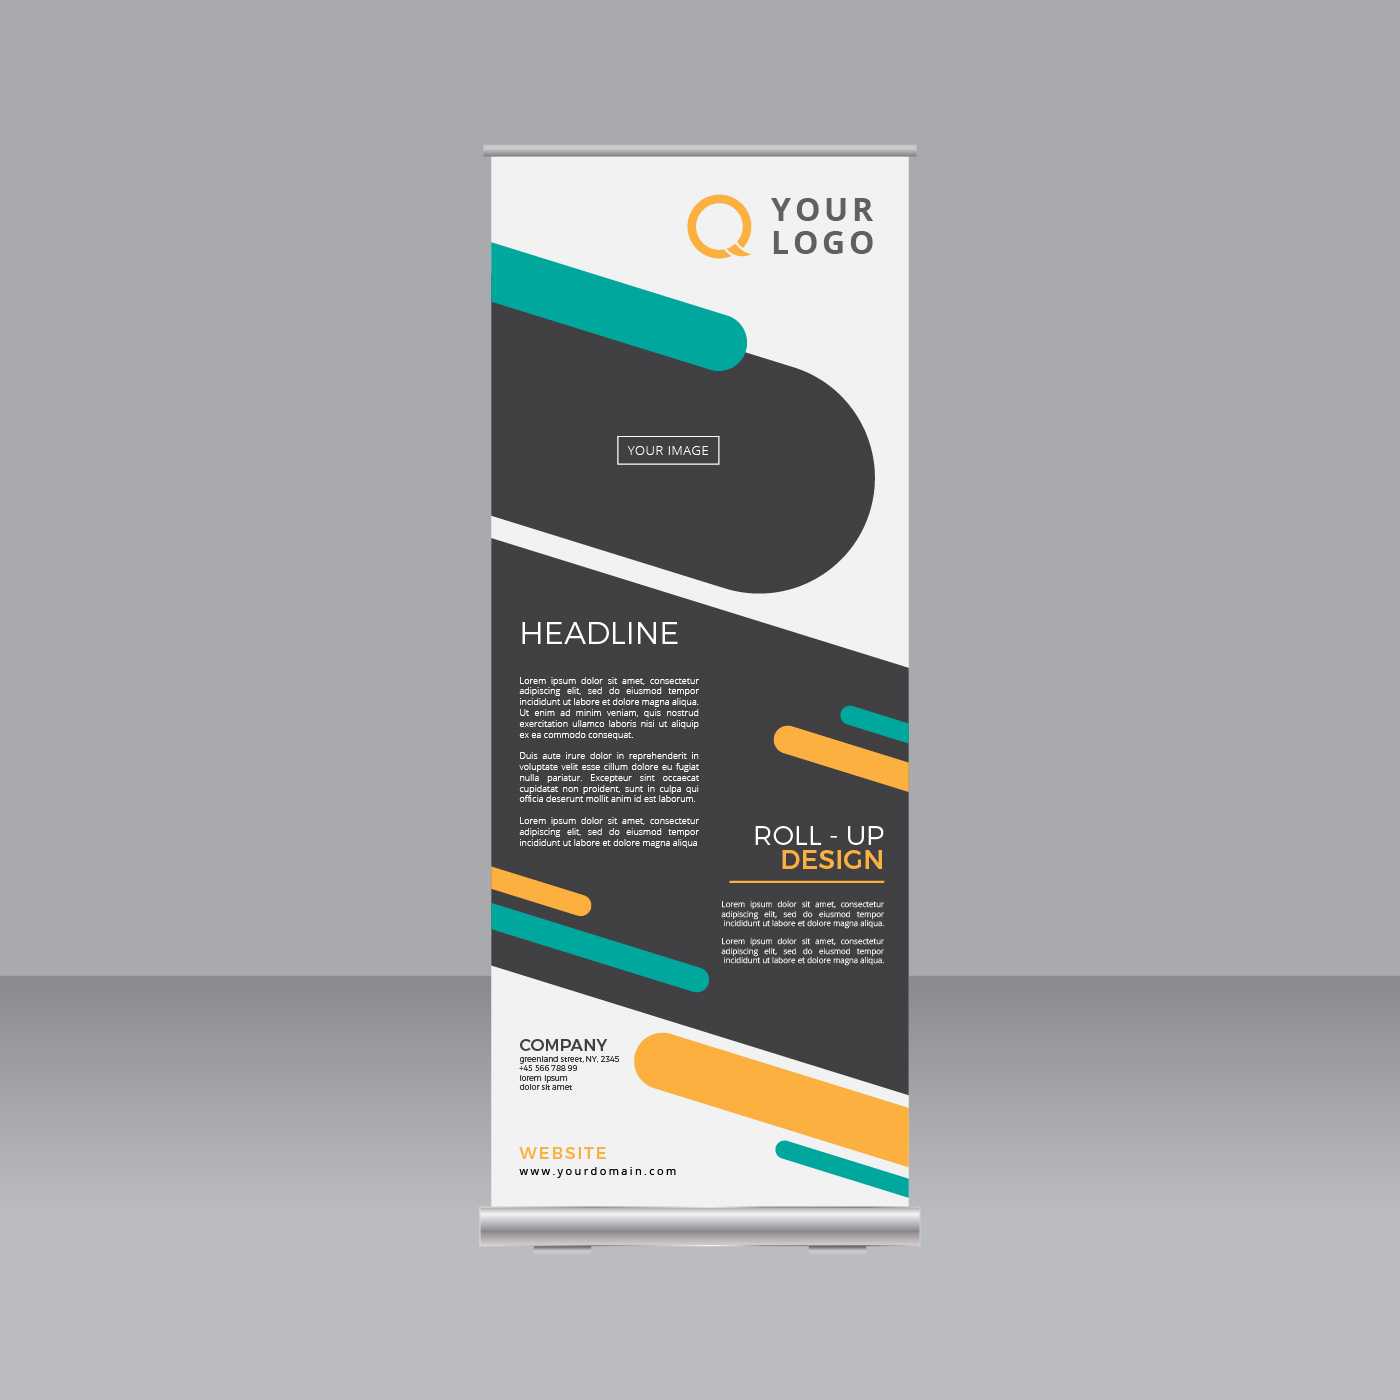 Roll Up Design Free Vector Art – (35,346 Free Downloads) With Regard To Pop Up Banner Design Template